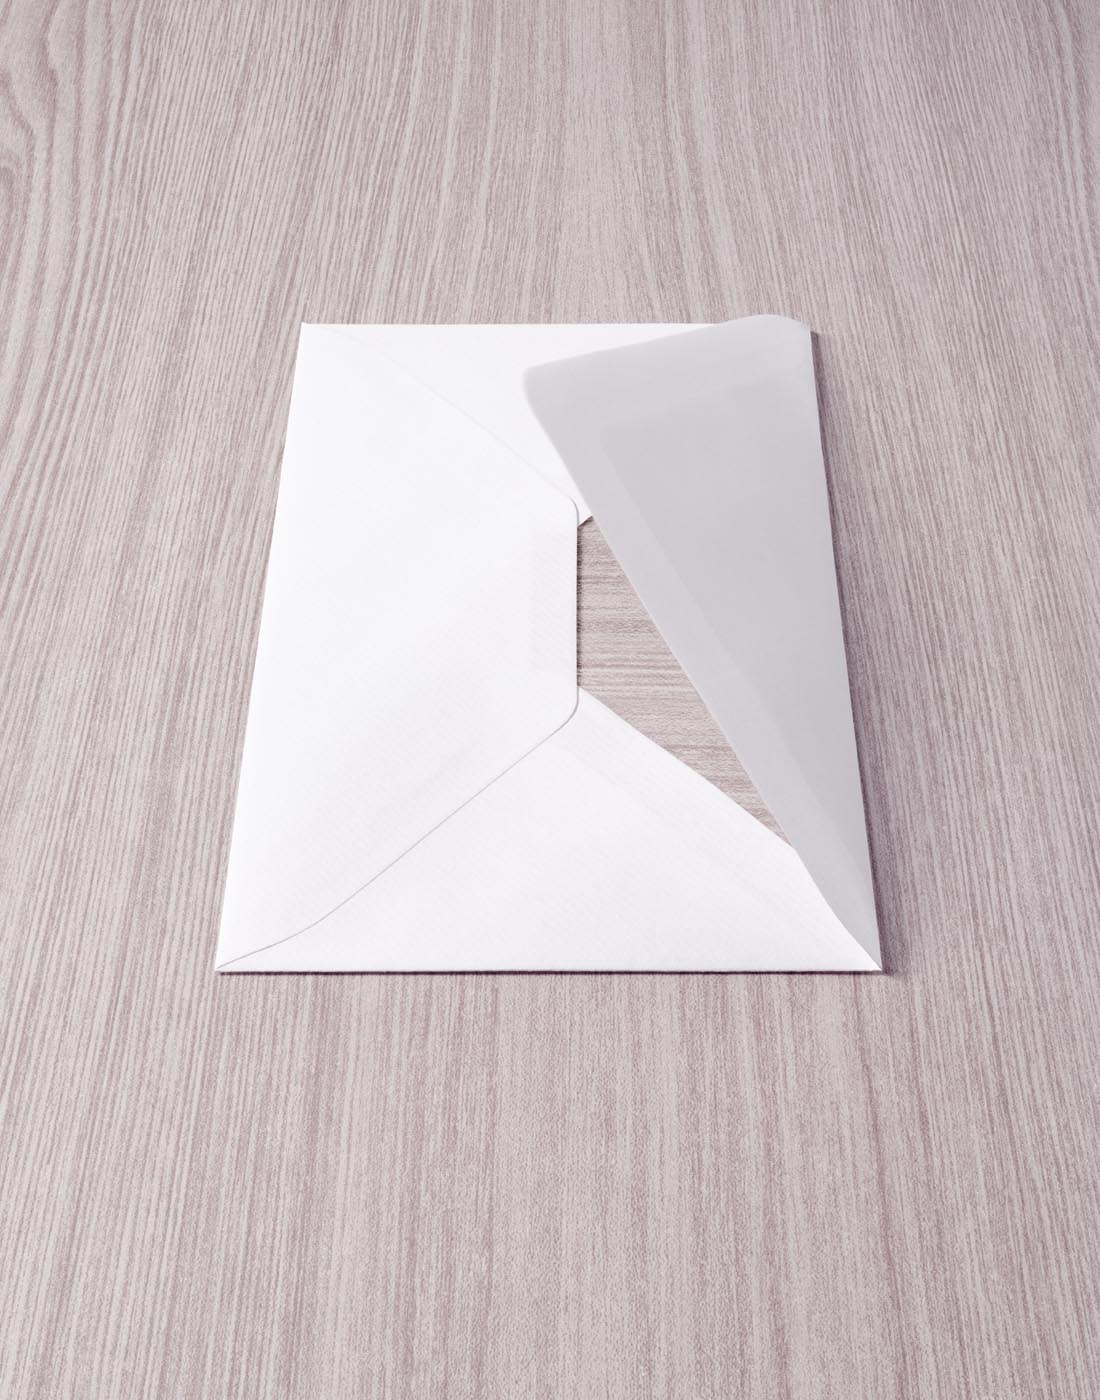 Envelope on same coloured wood by Alexander Kent London based still life and product photographer.